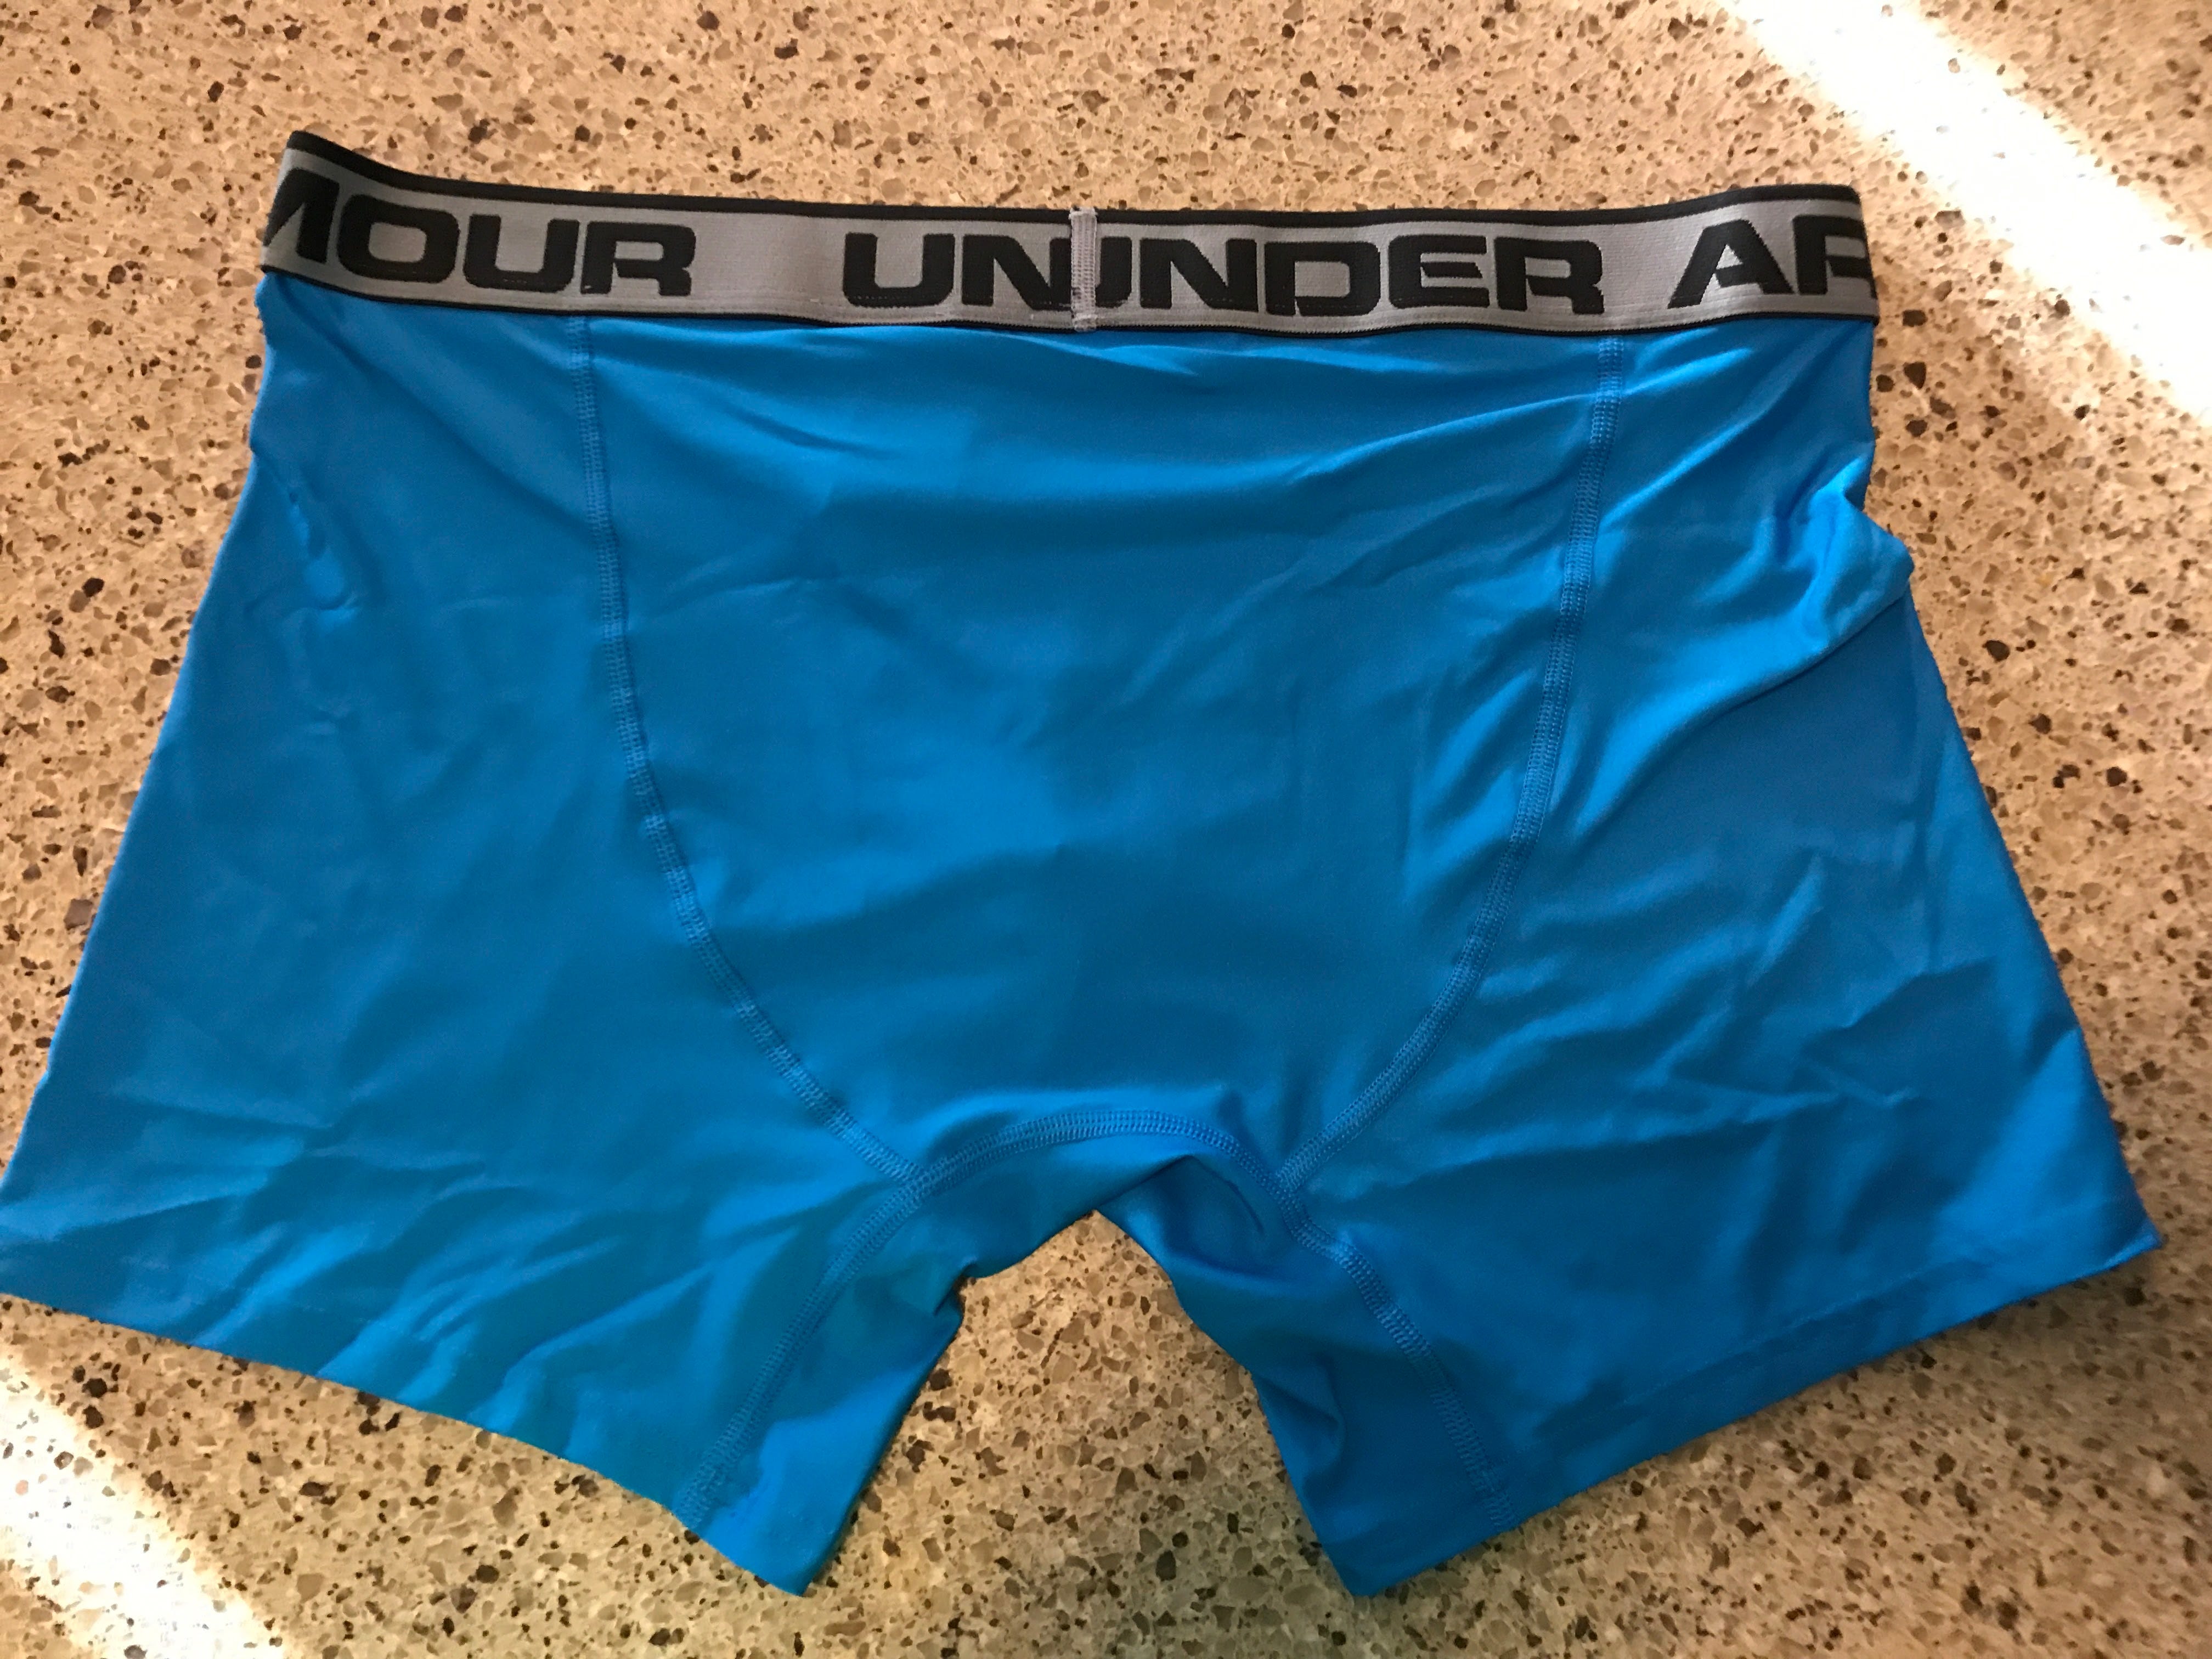 Under Armour Boxerjock review. Sometimes Under Armour stuff can be…, by  Datapotomus